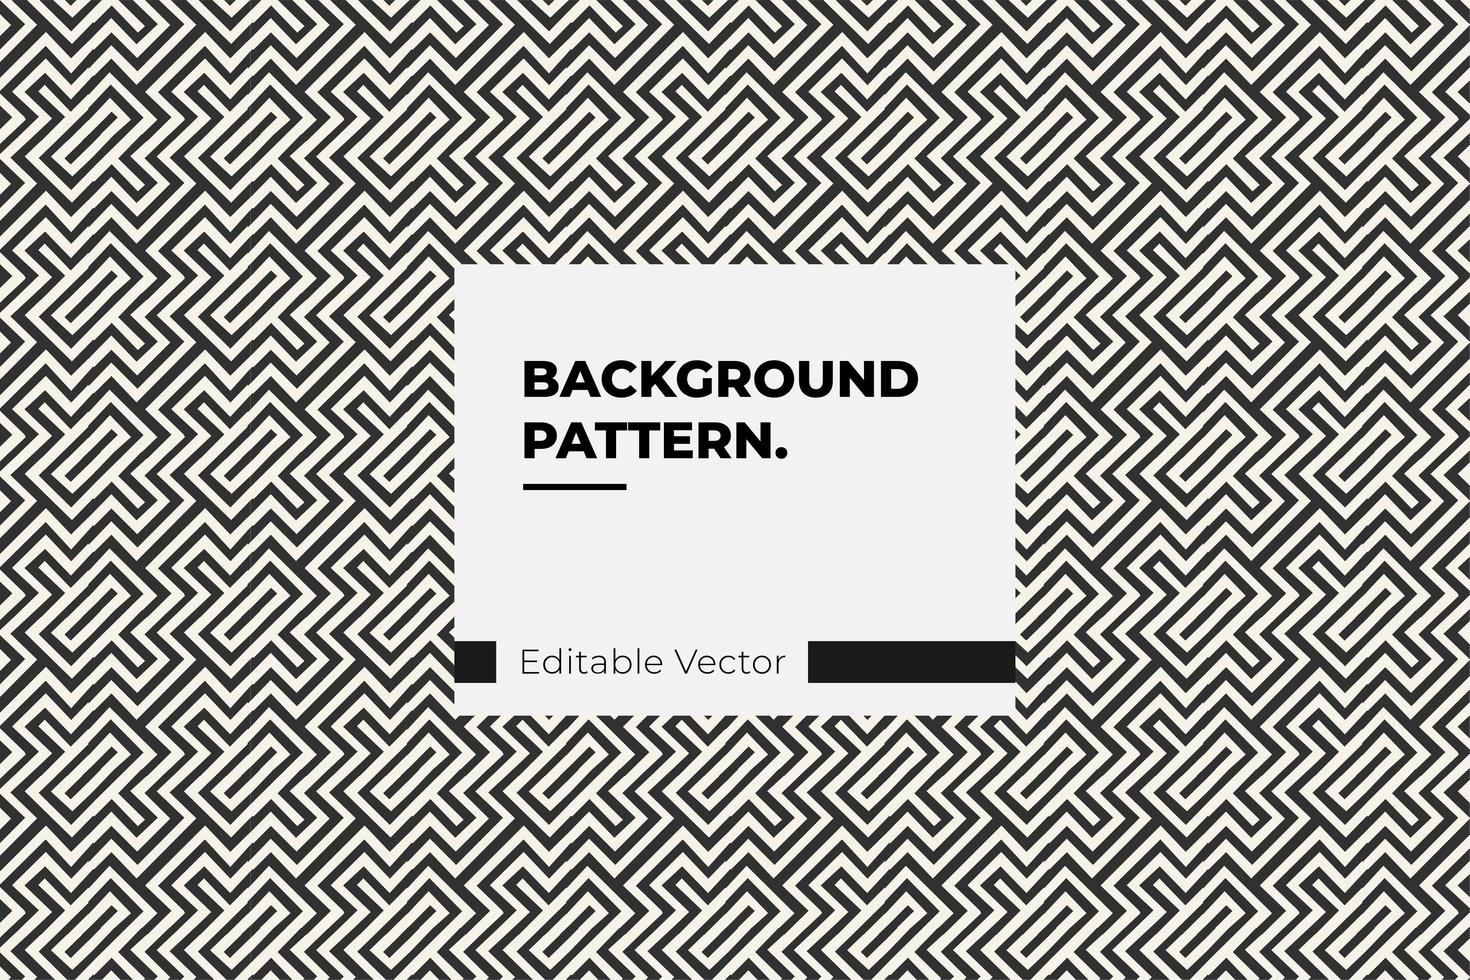 Abstract retro black and white pattern vector